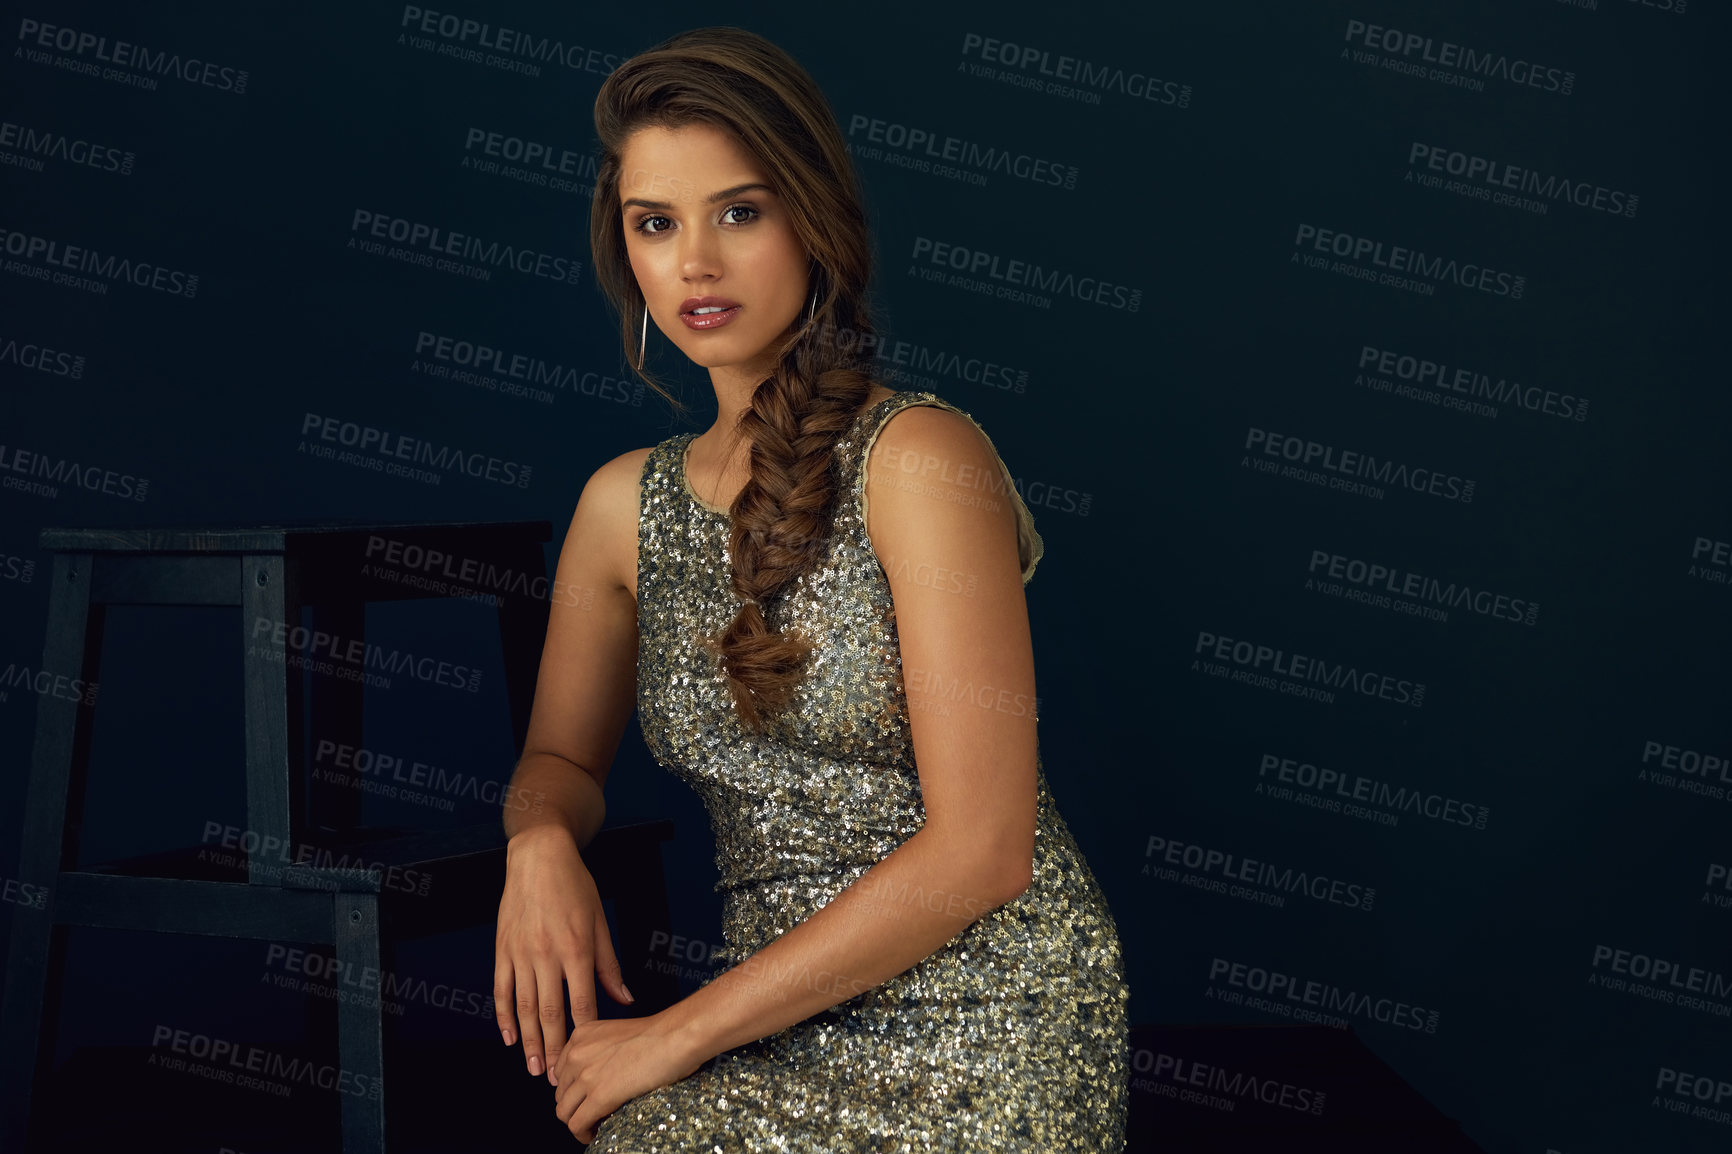 Buy stock photo Portrait of a beautiful young woman in a sequined dress posing against a dark background